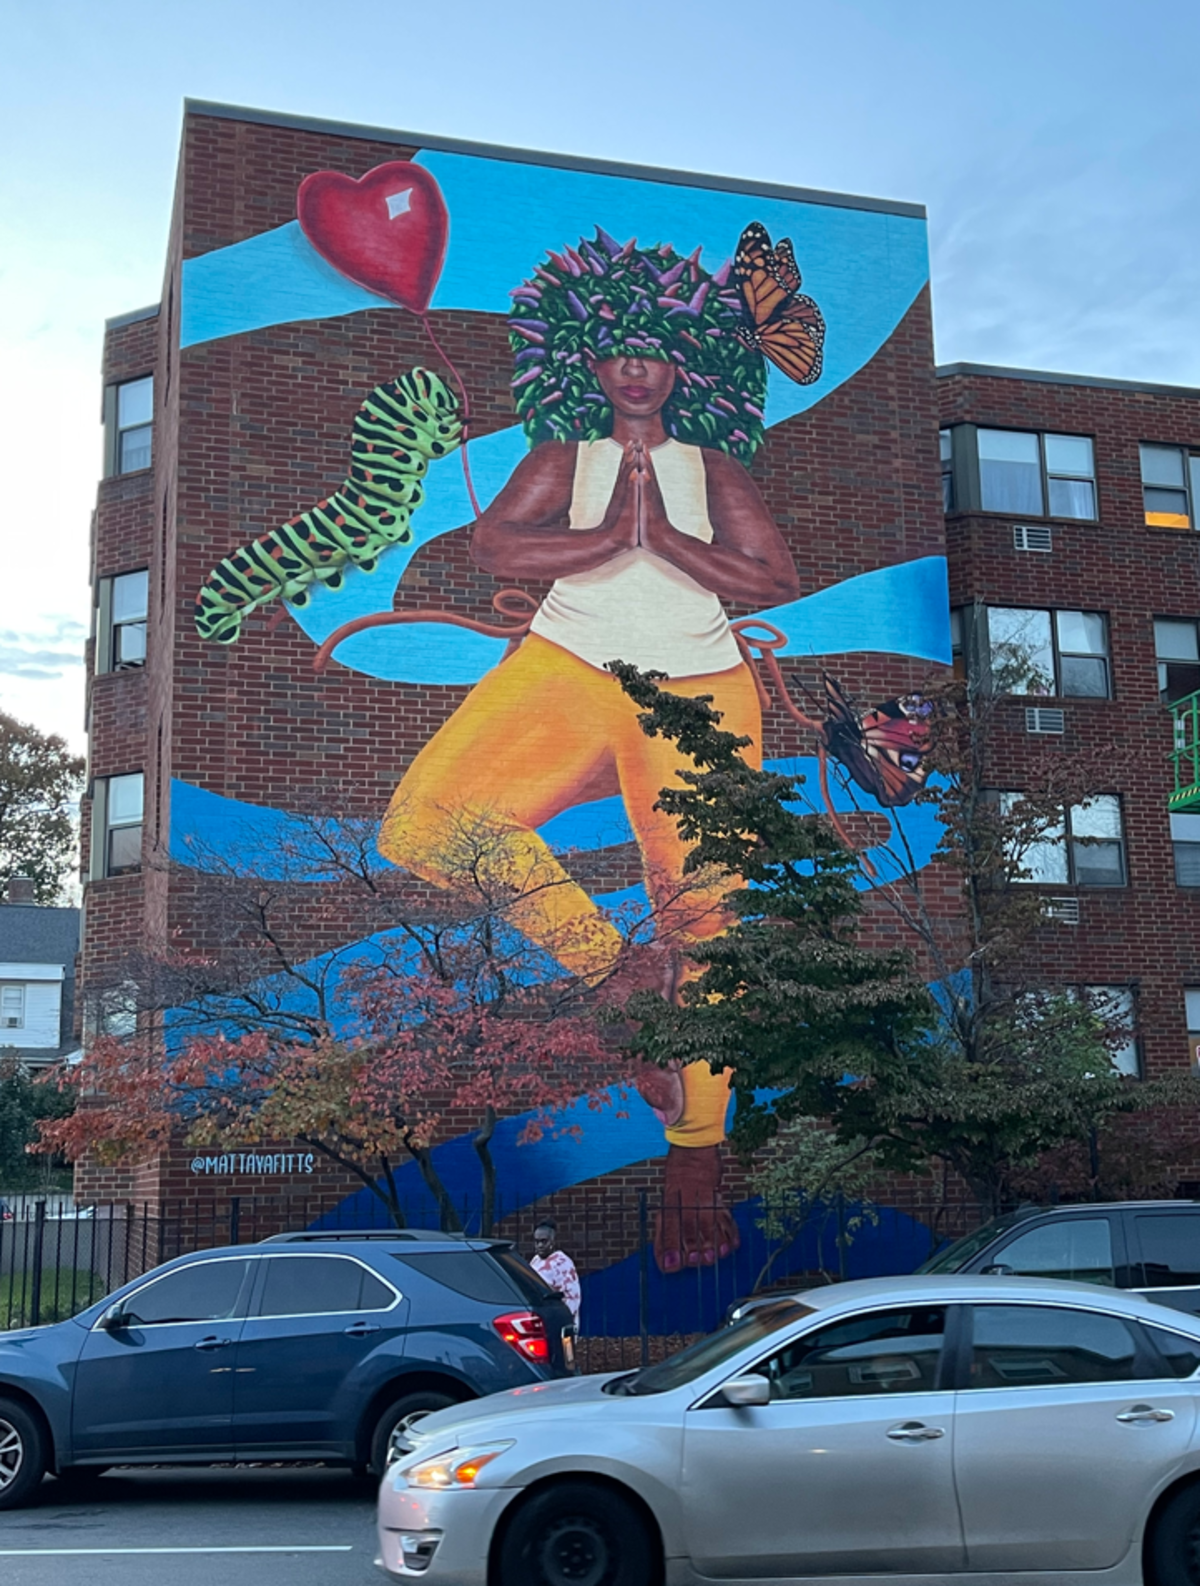 The Joy of Growing mural by Mattaya Fitts